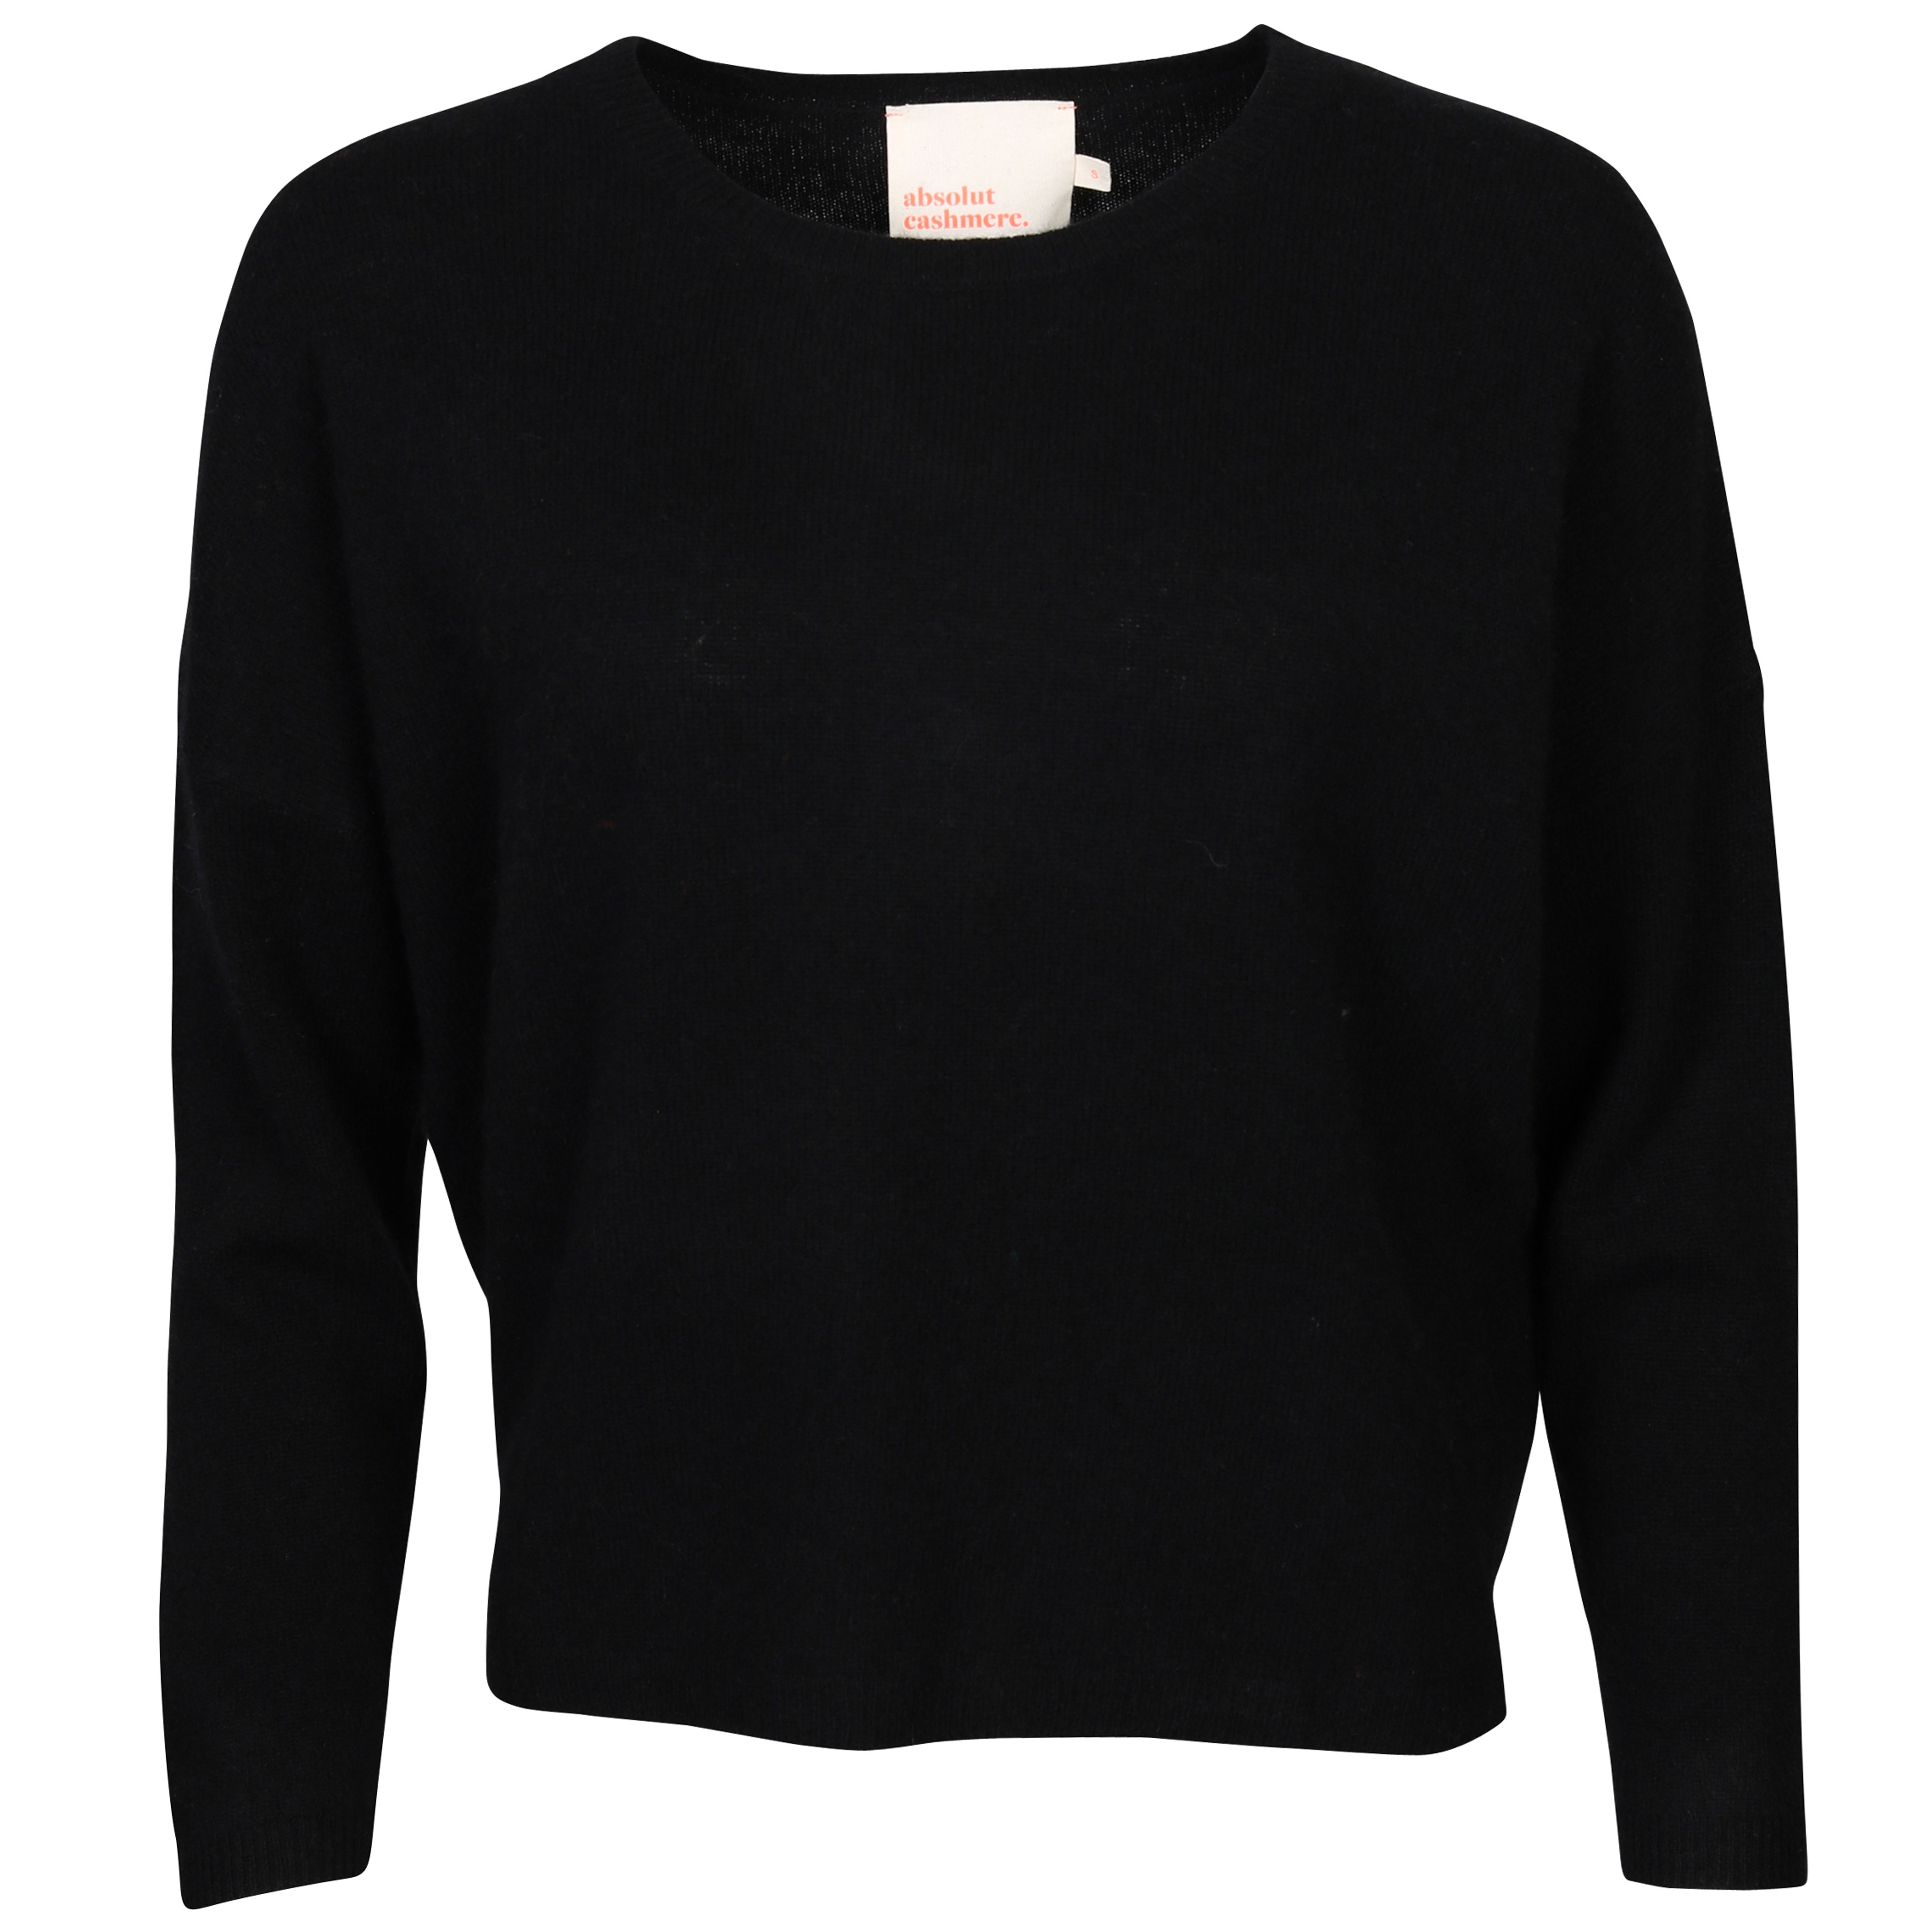 Absolut Cashmere Kaira Cashmere Pullover in Noir S